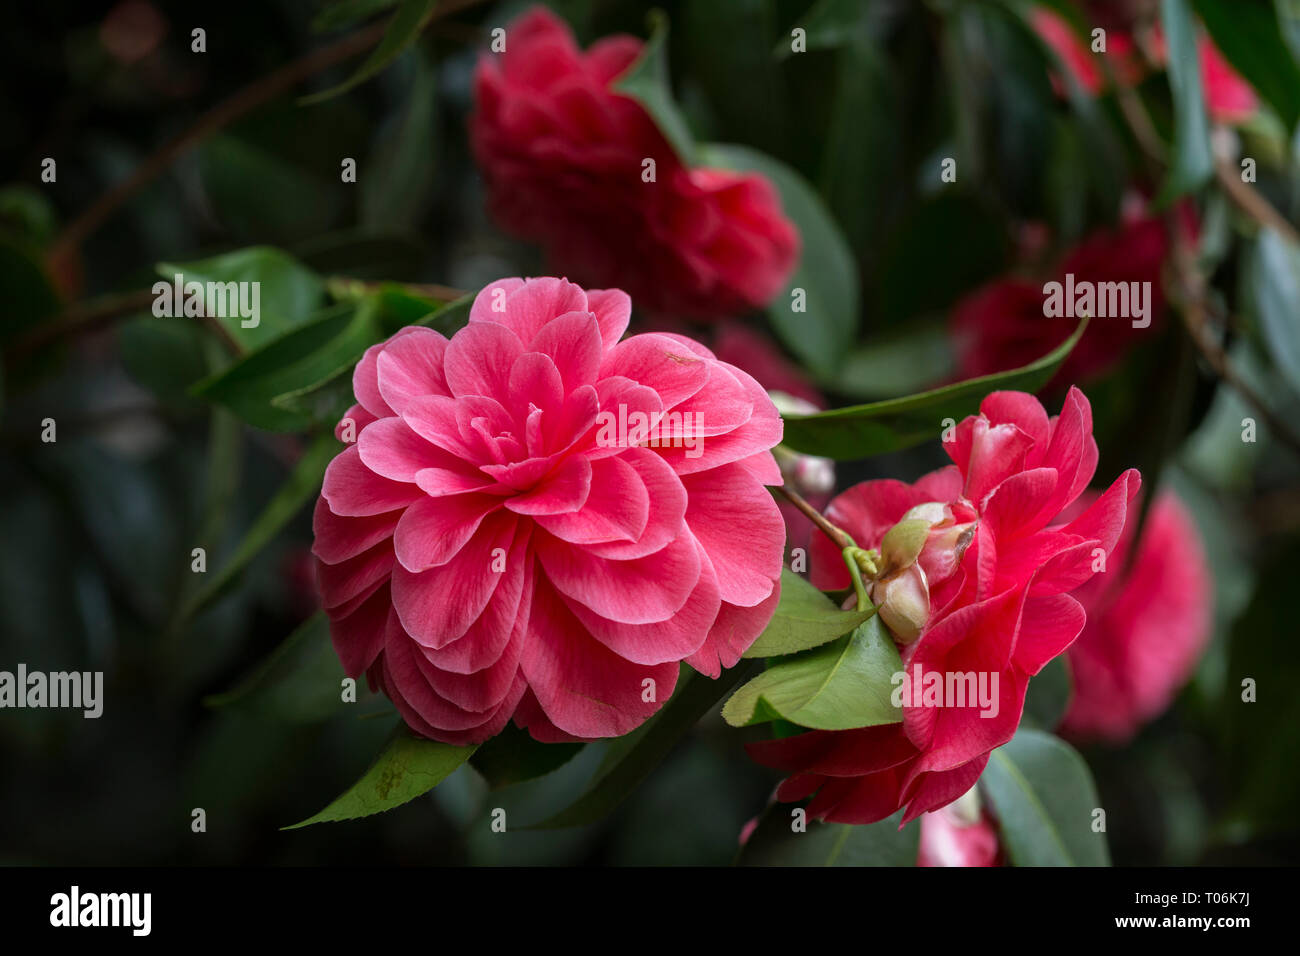 Close-up of beautiful blooming pink Camellia japonica (also known as common camellia or Japanese camellia) 'Palazzo Tursi', a flowering tree or shrub. Stock Photo